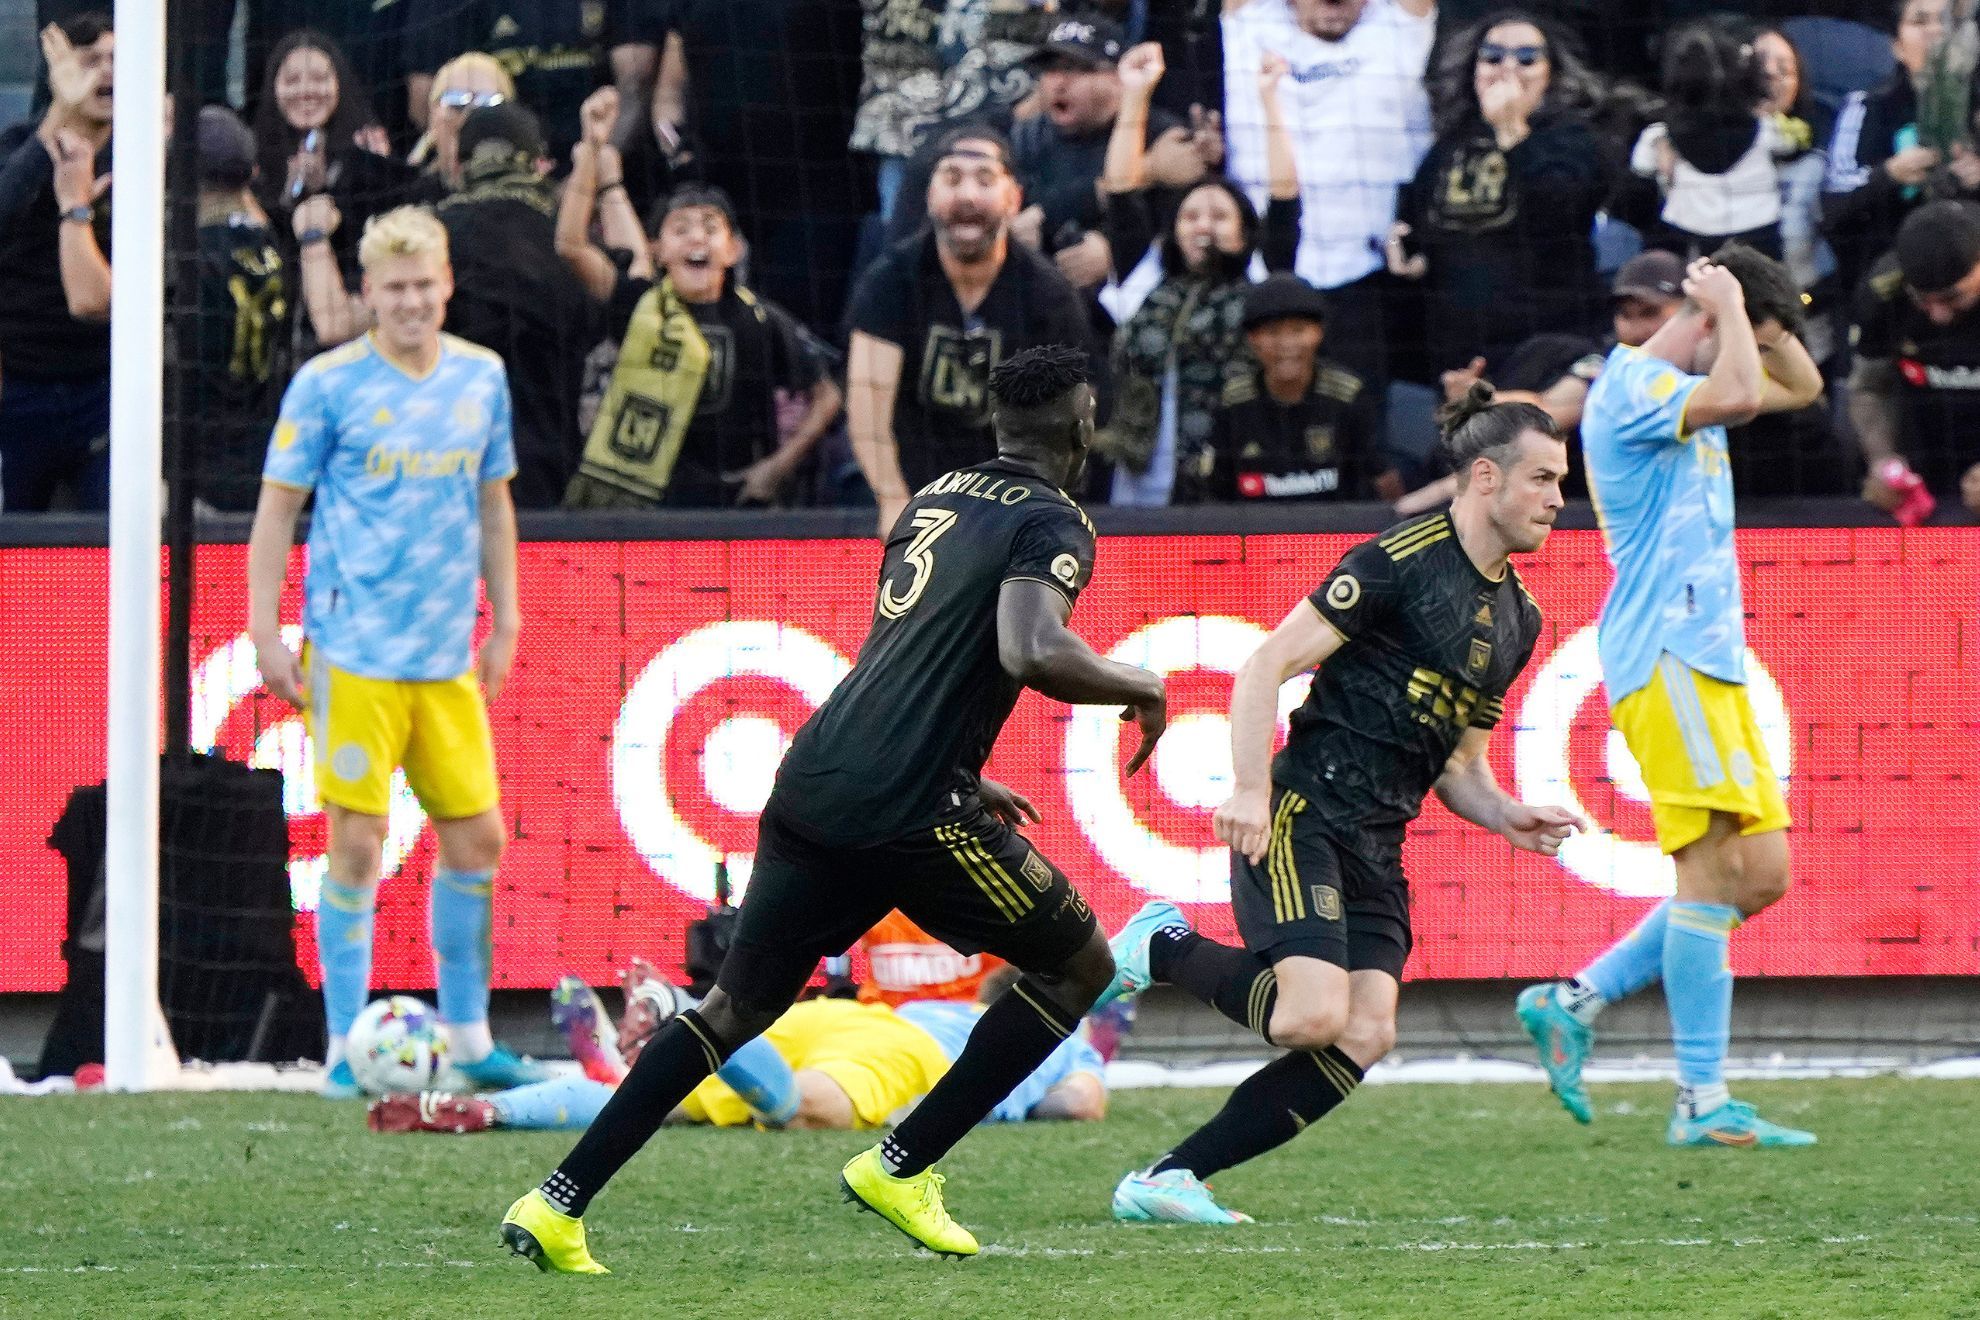 Gareth Bale (LAFC) celebrates after scoring qualizer in extra time of MLS Cup vs. Philadelphia Union